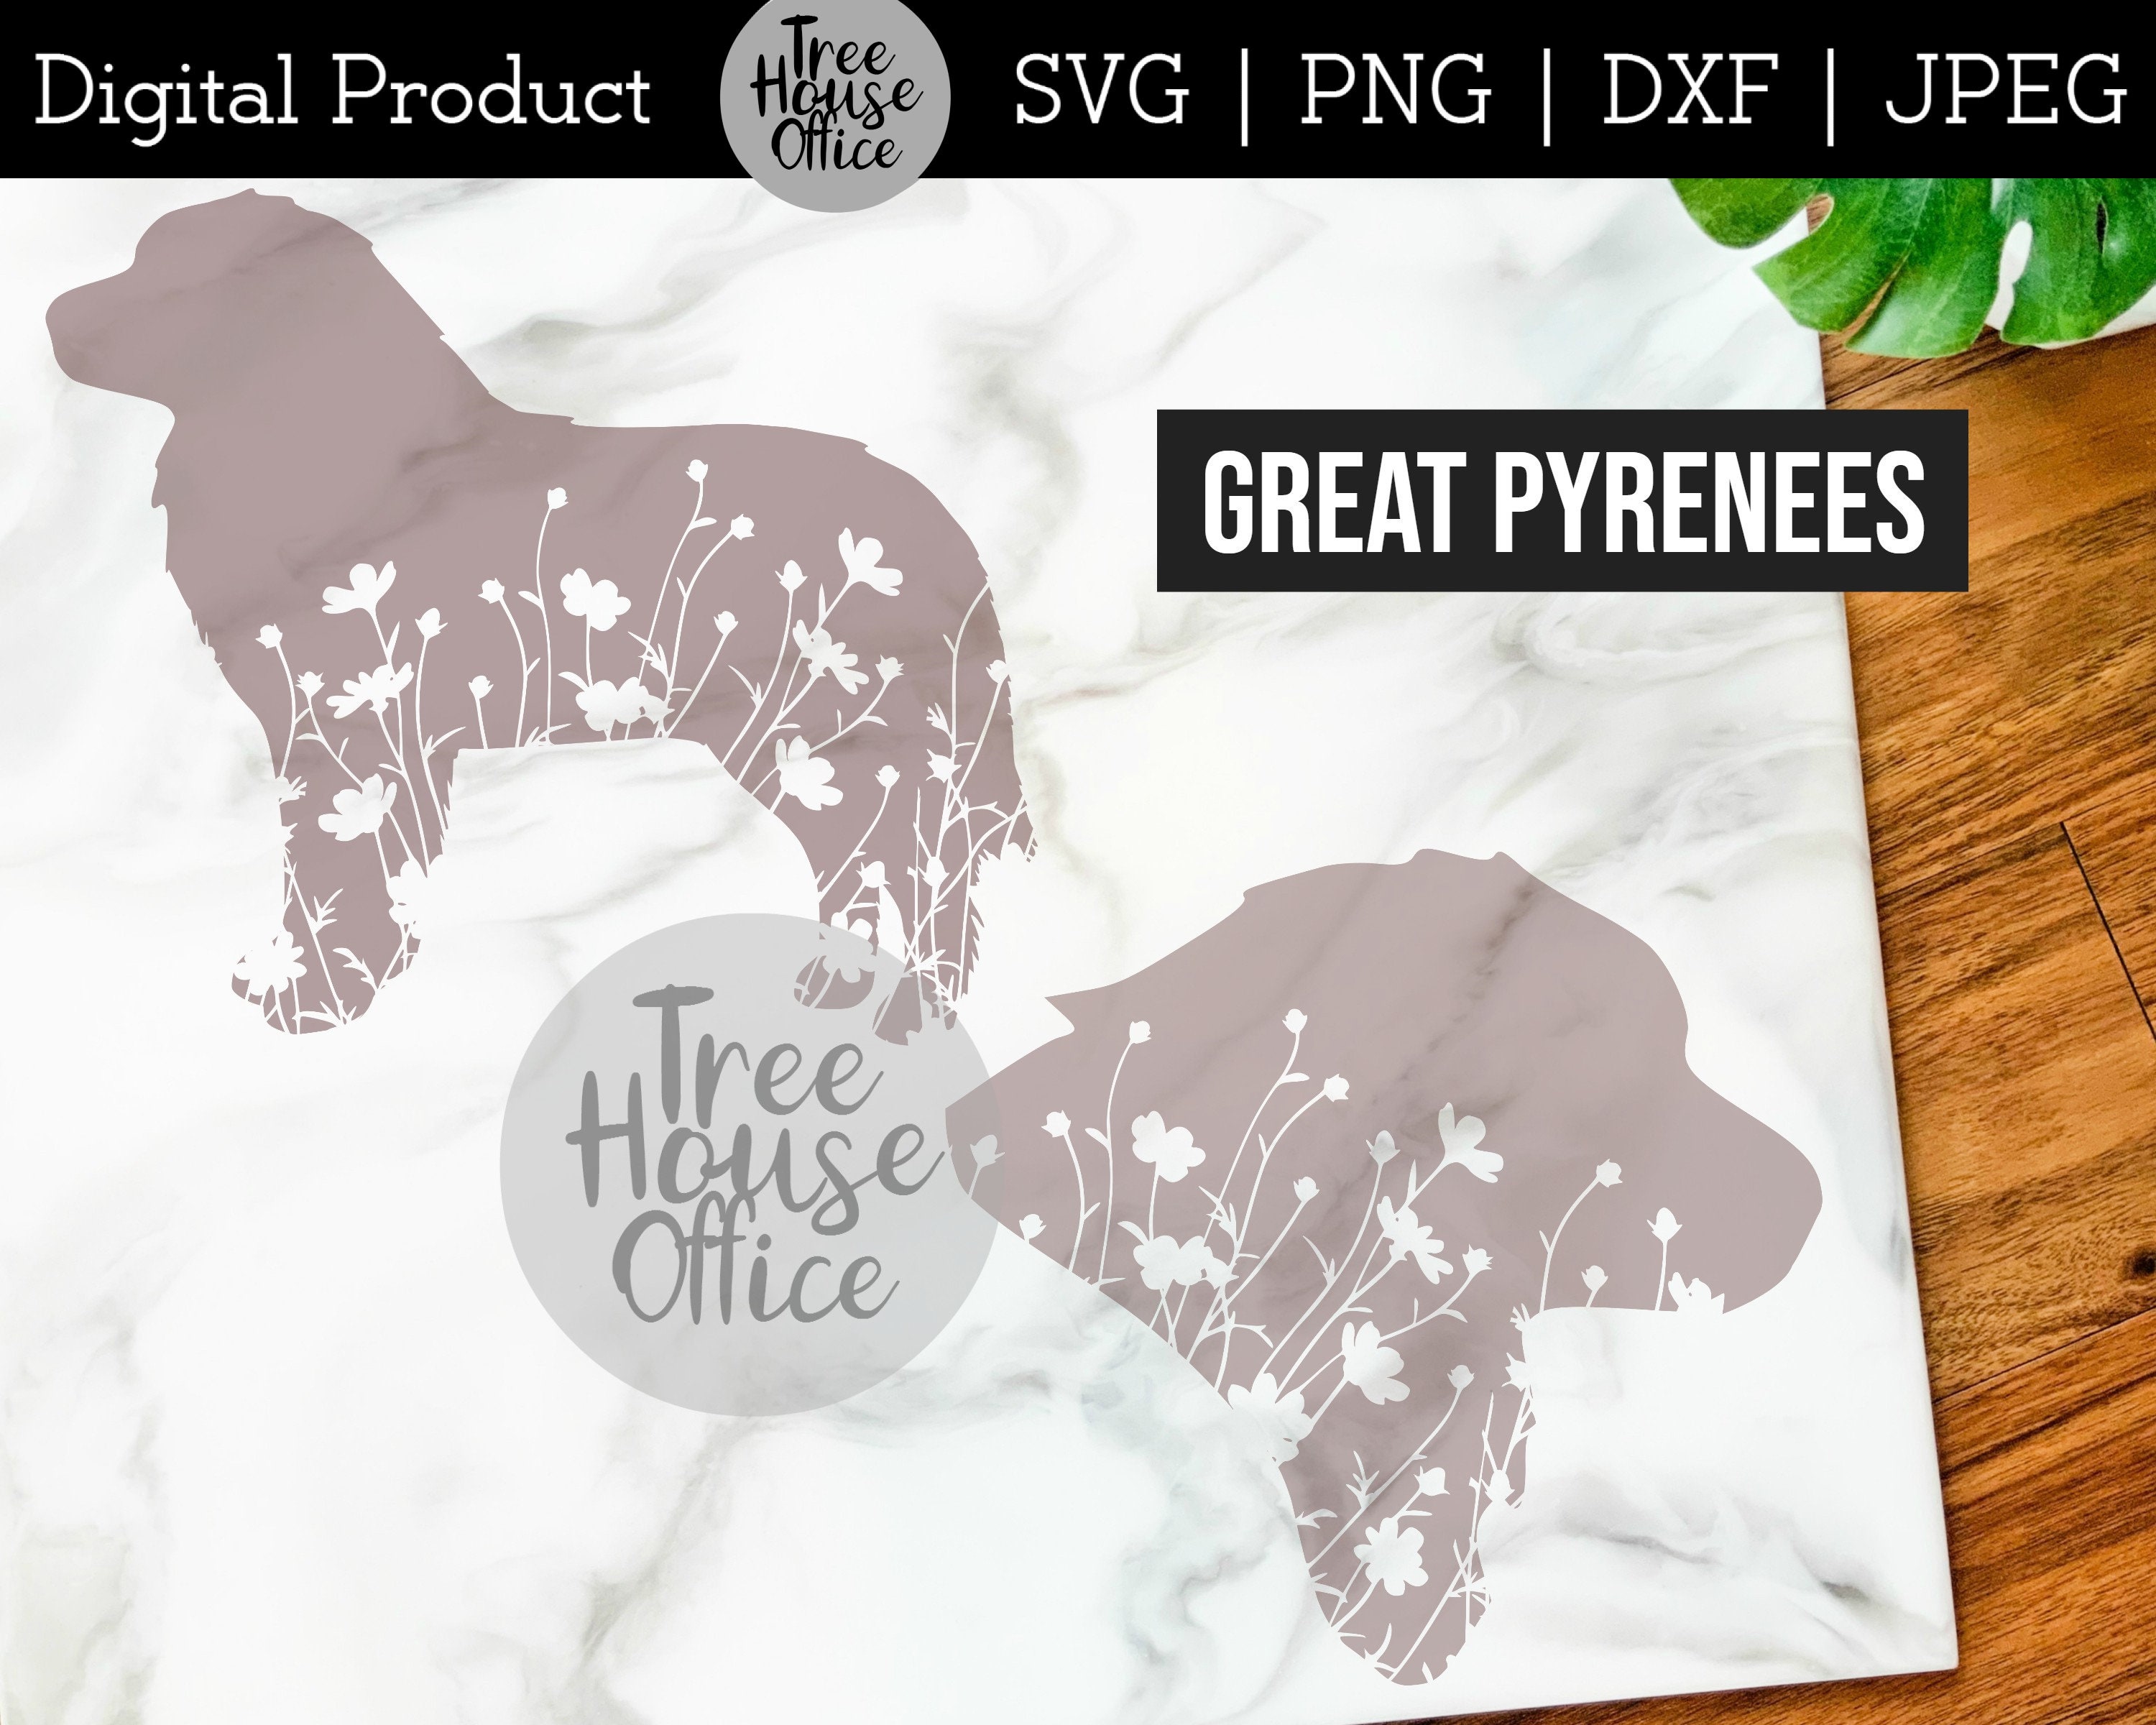 Great Pyrenees SVG DXF PNG Jpeg Floral Great Pyrenees Svg - Etsy UK